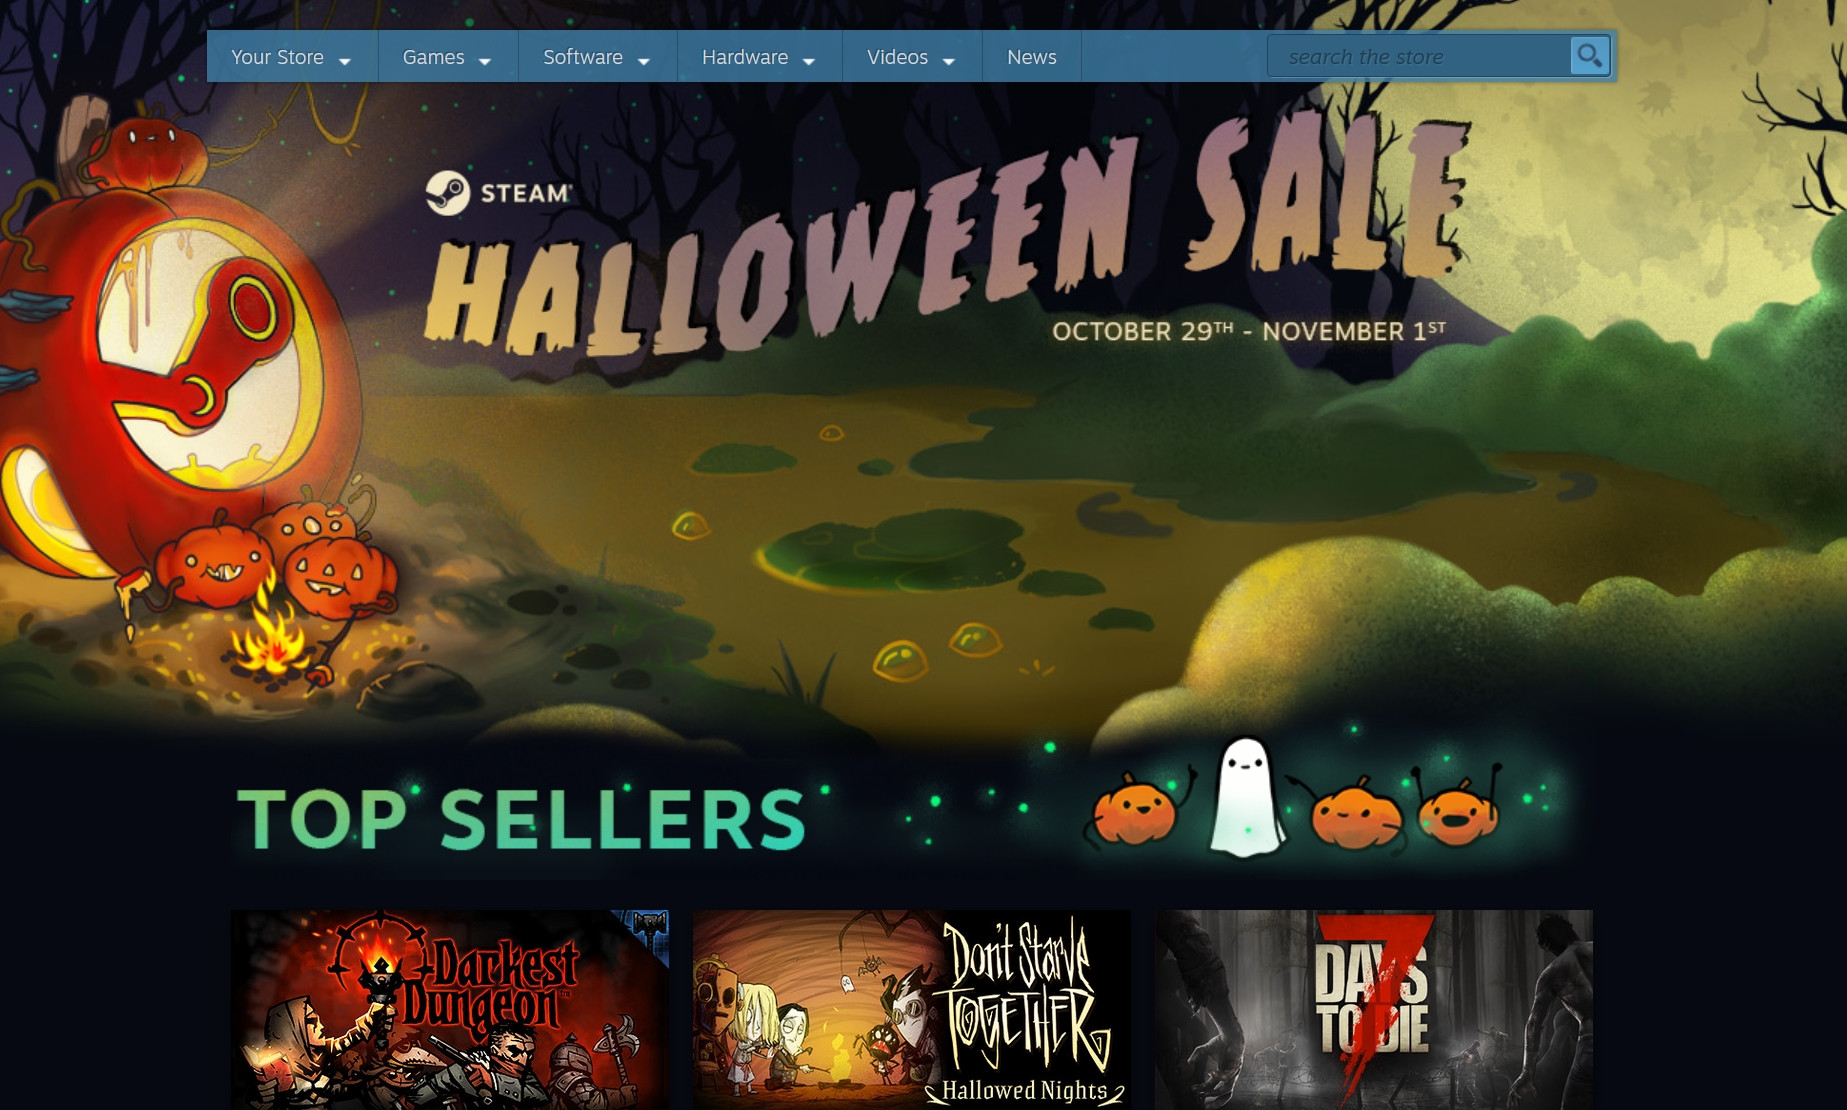 Steam Halloween Sale 18 Is On Up To 85 Off In Some Titles Techpowerup